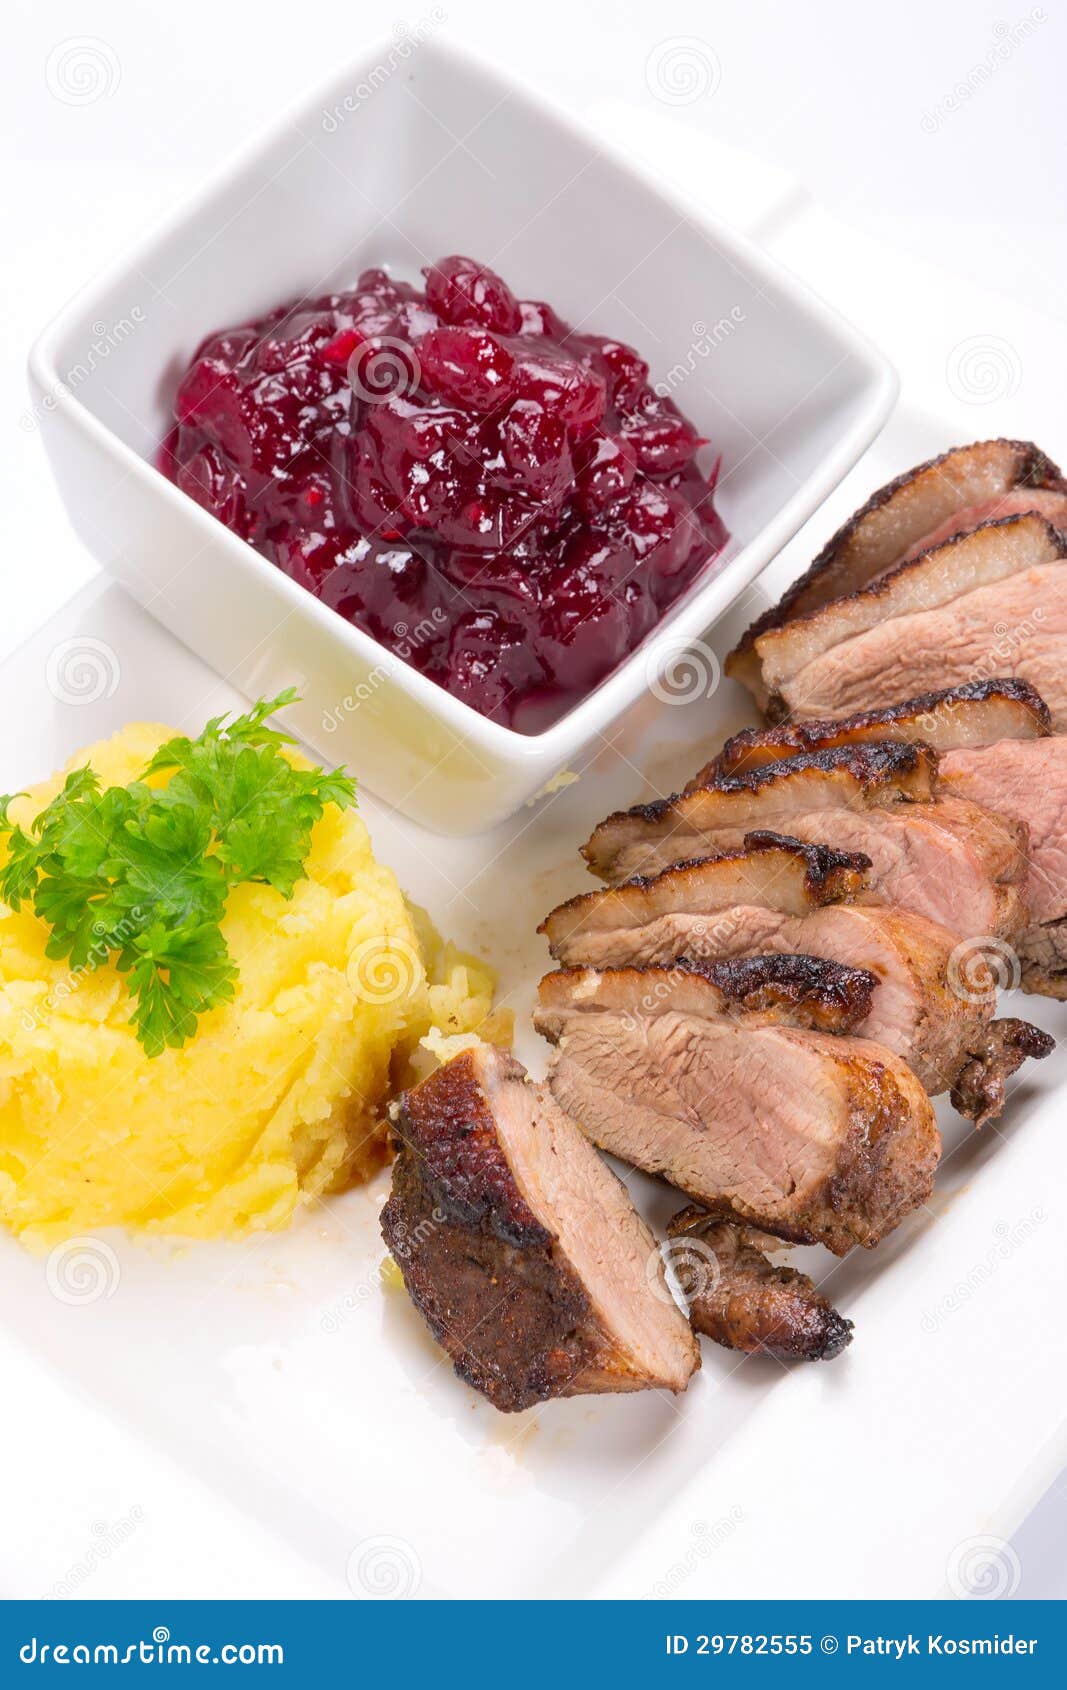 Roasted Duck Breast with Potatoes Stock Image - Image of homemade ...